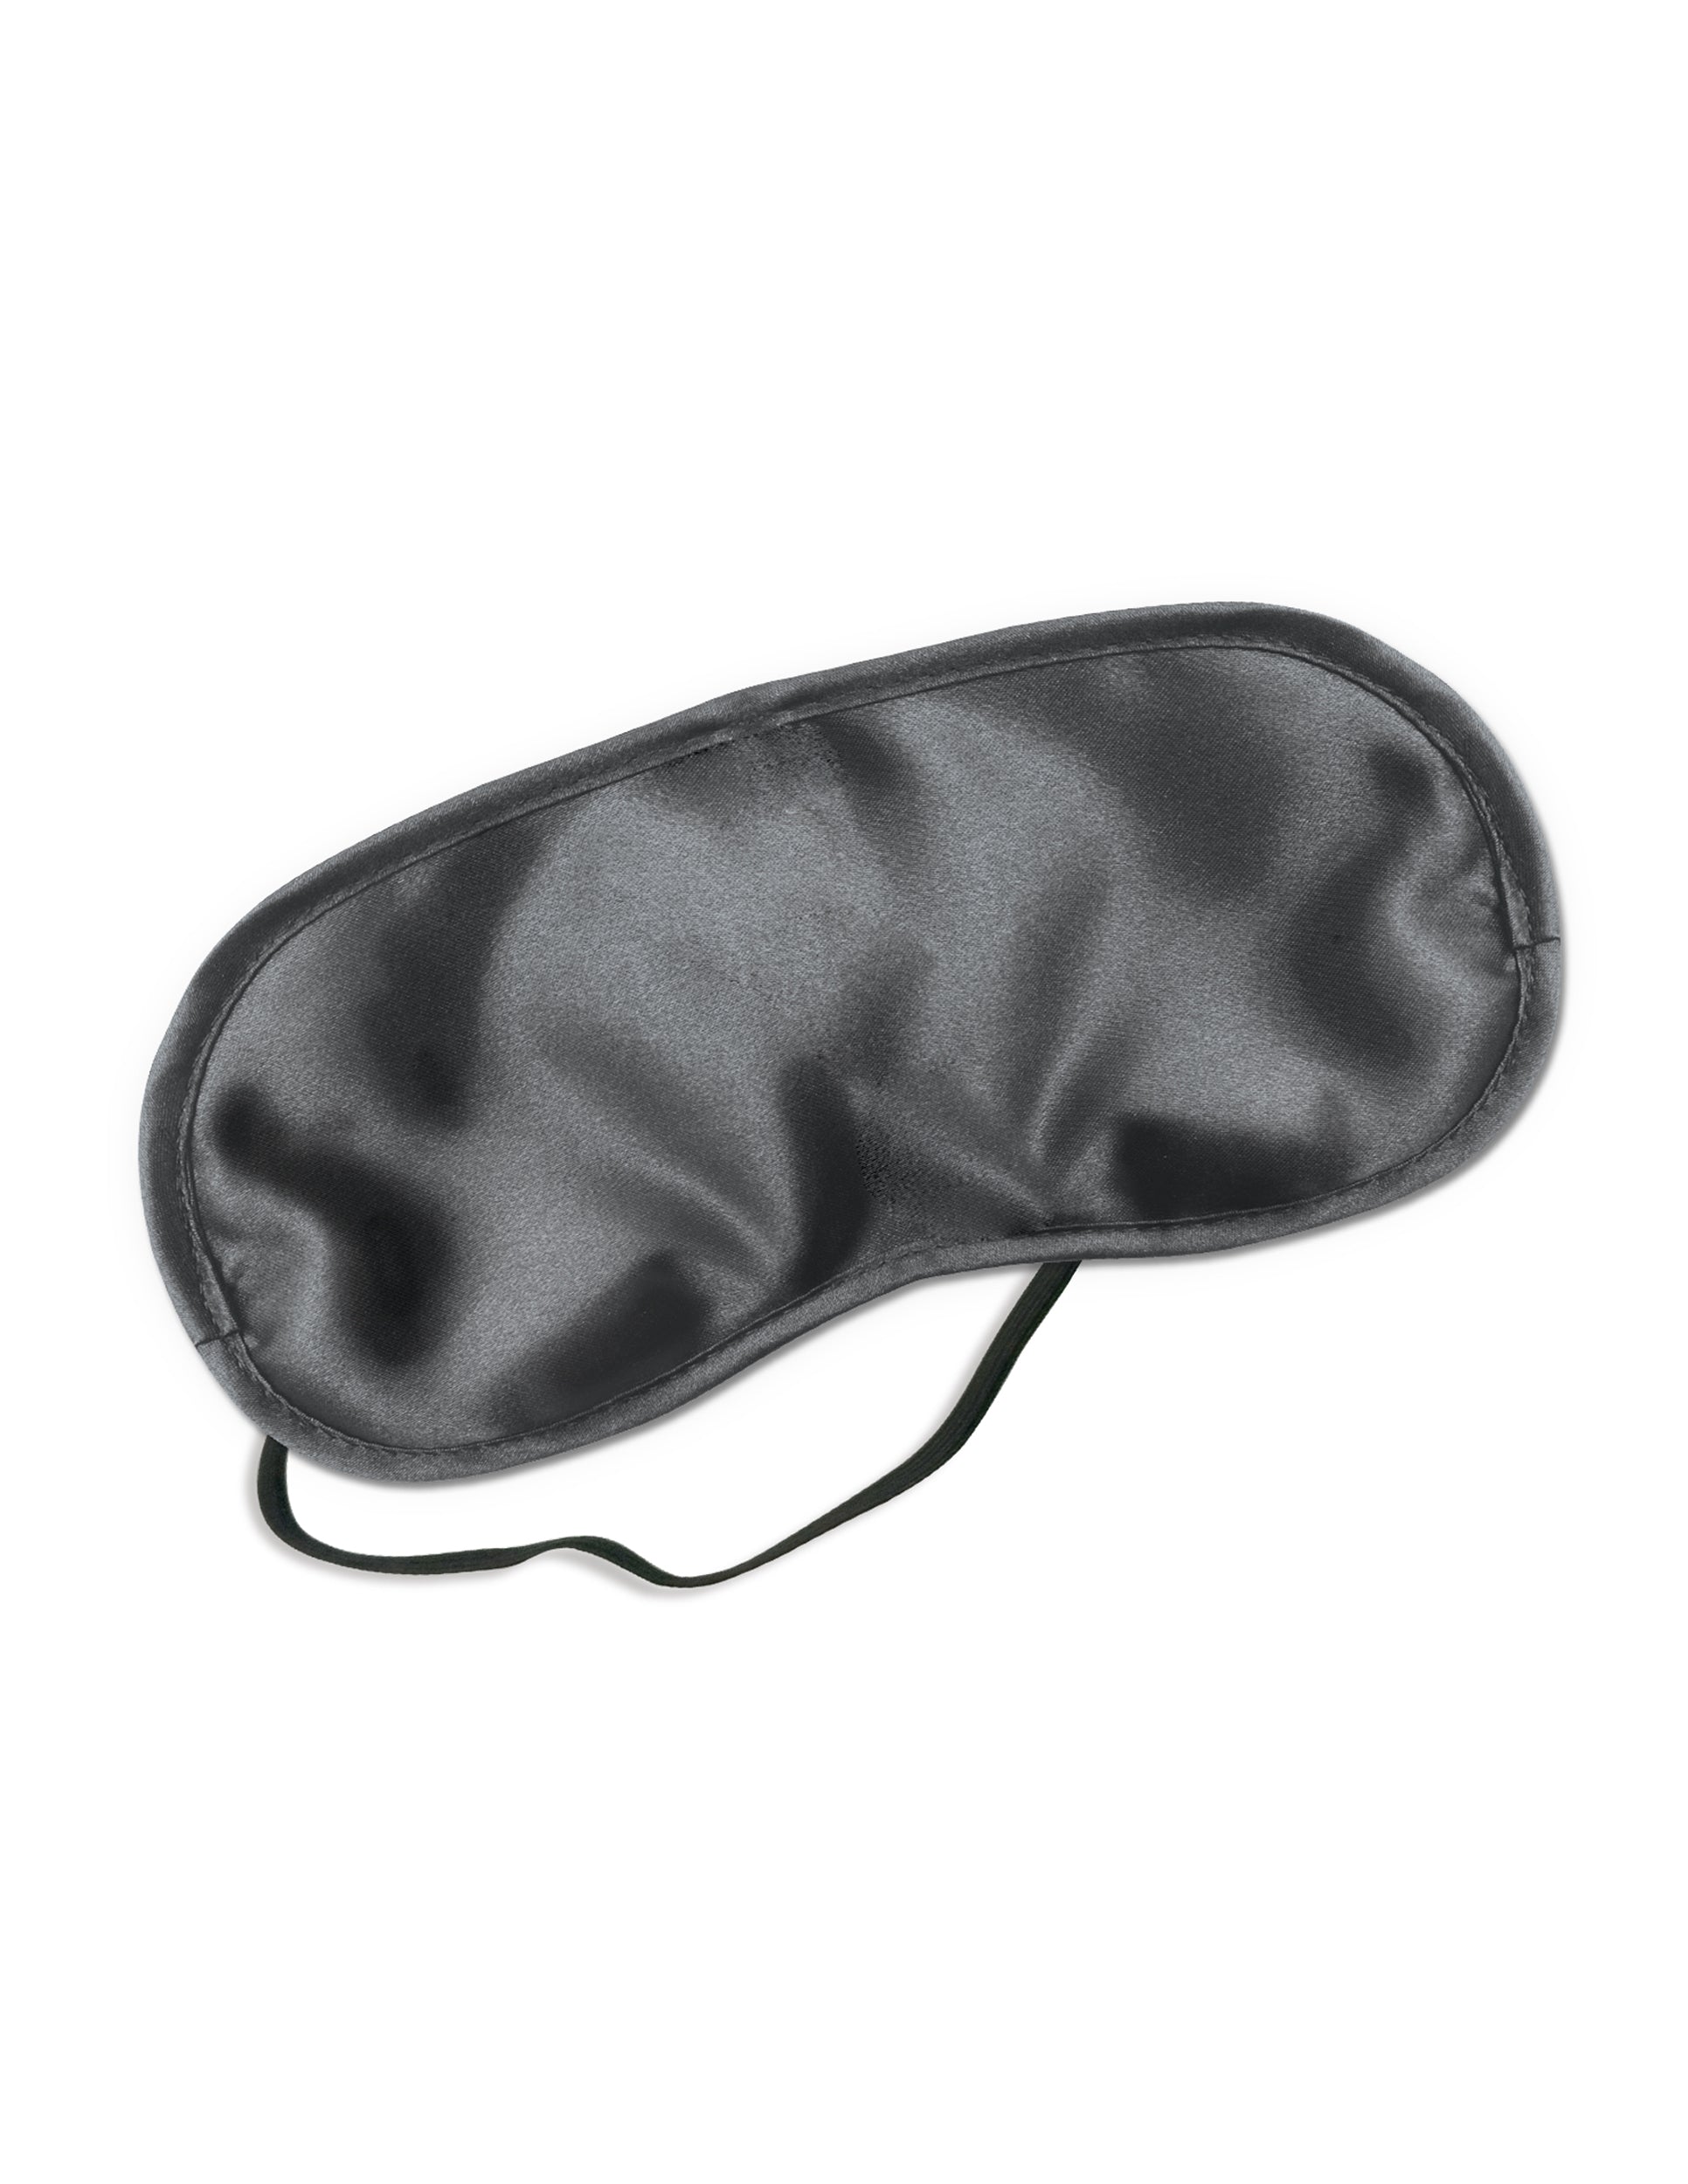 Fetish Fantasy Series Limited Edition Satin Love Mask PD4405-23